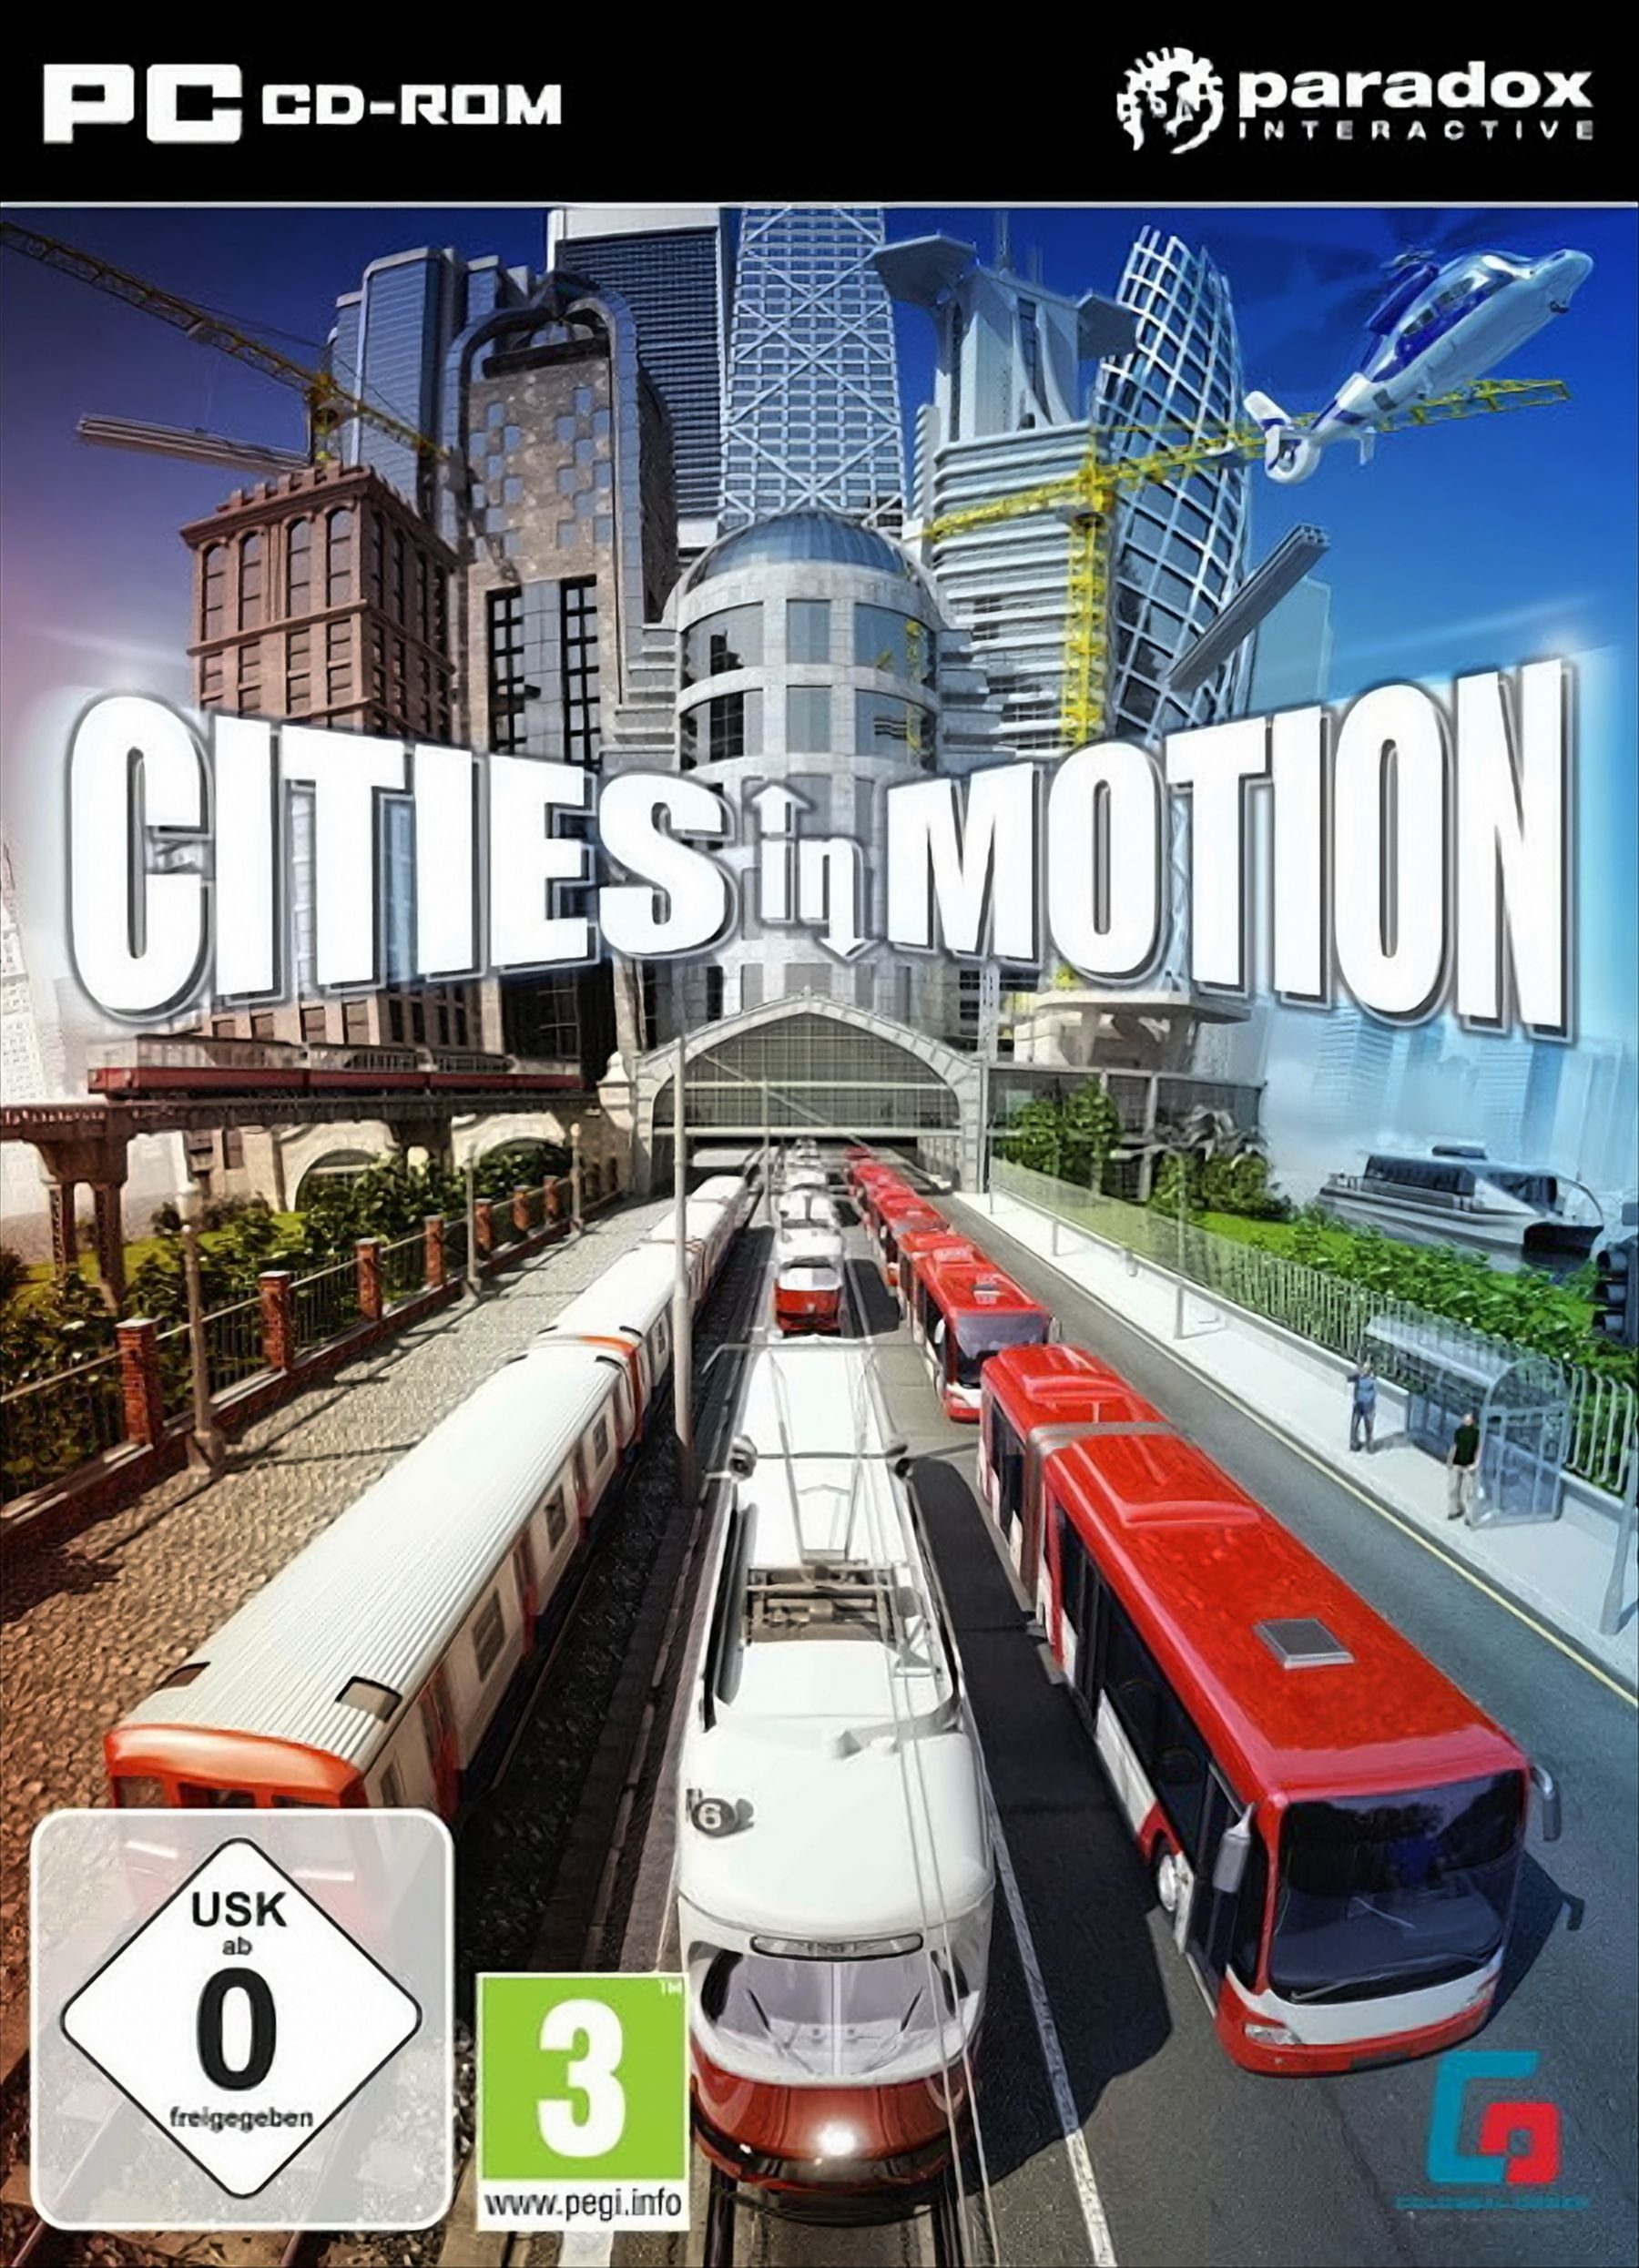 Cities In Motion PC